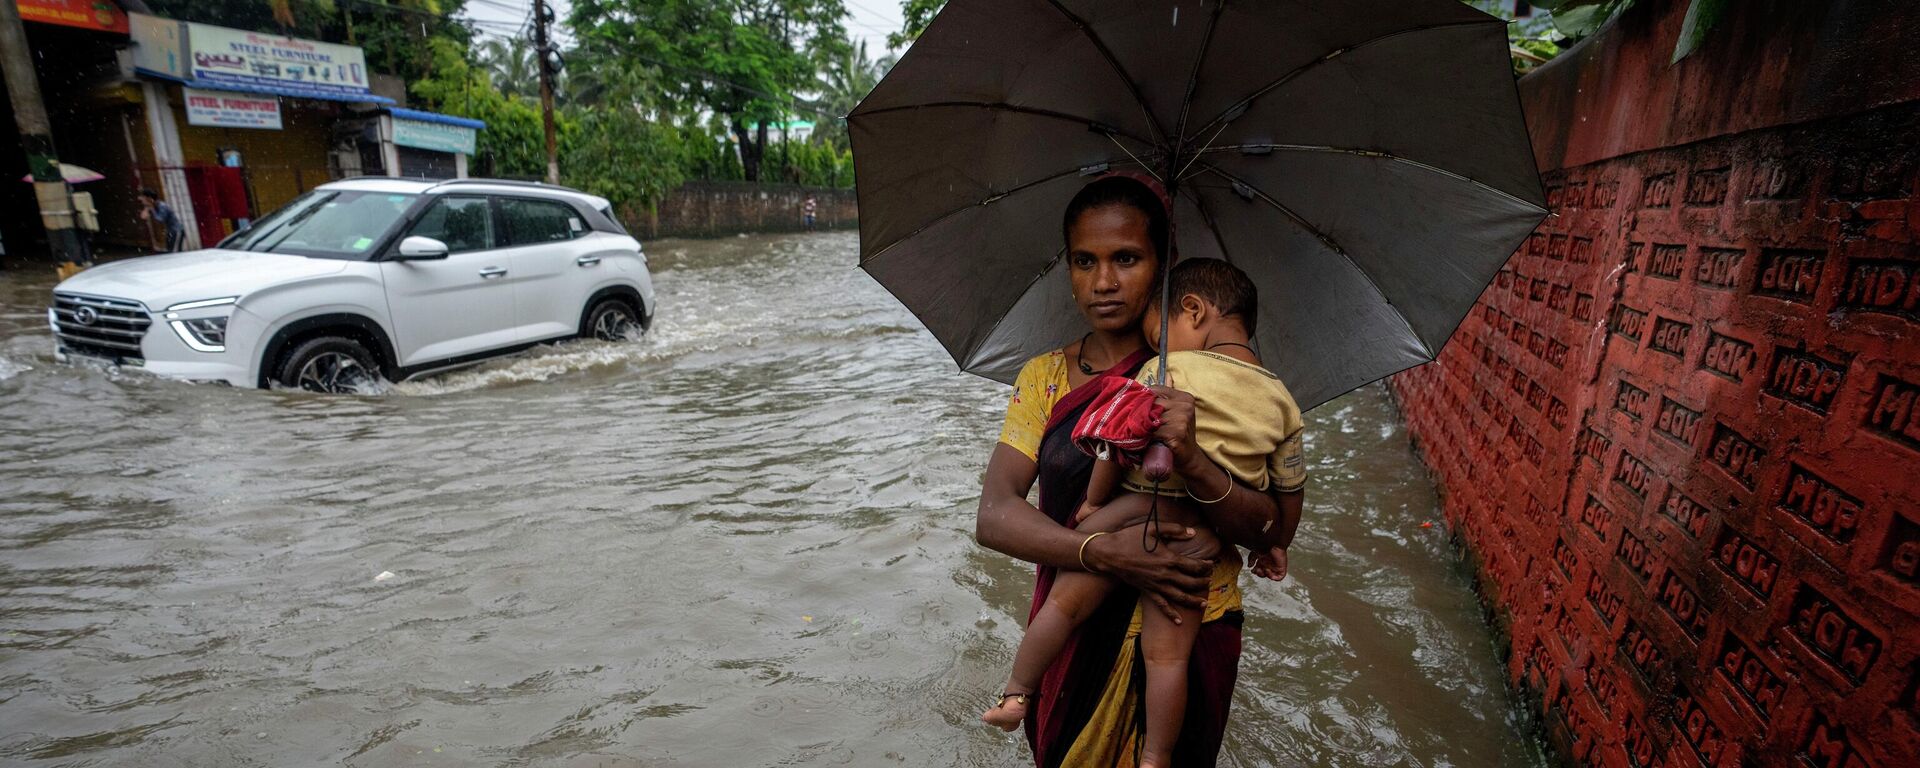 A woman carries a child and wades through a flooded street during heavy rainfall in Gauhati, India, Thursday, June 16, 2022 - Sputnik International, 1920, 20.06.2022